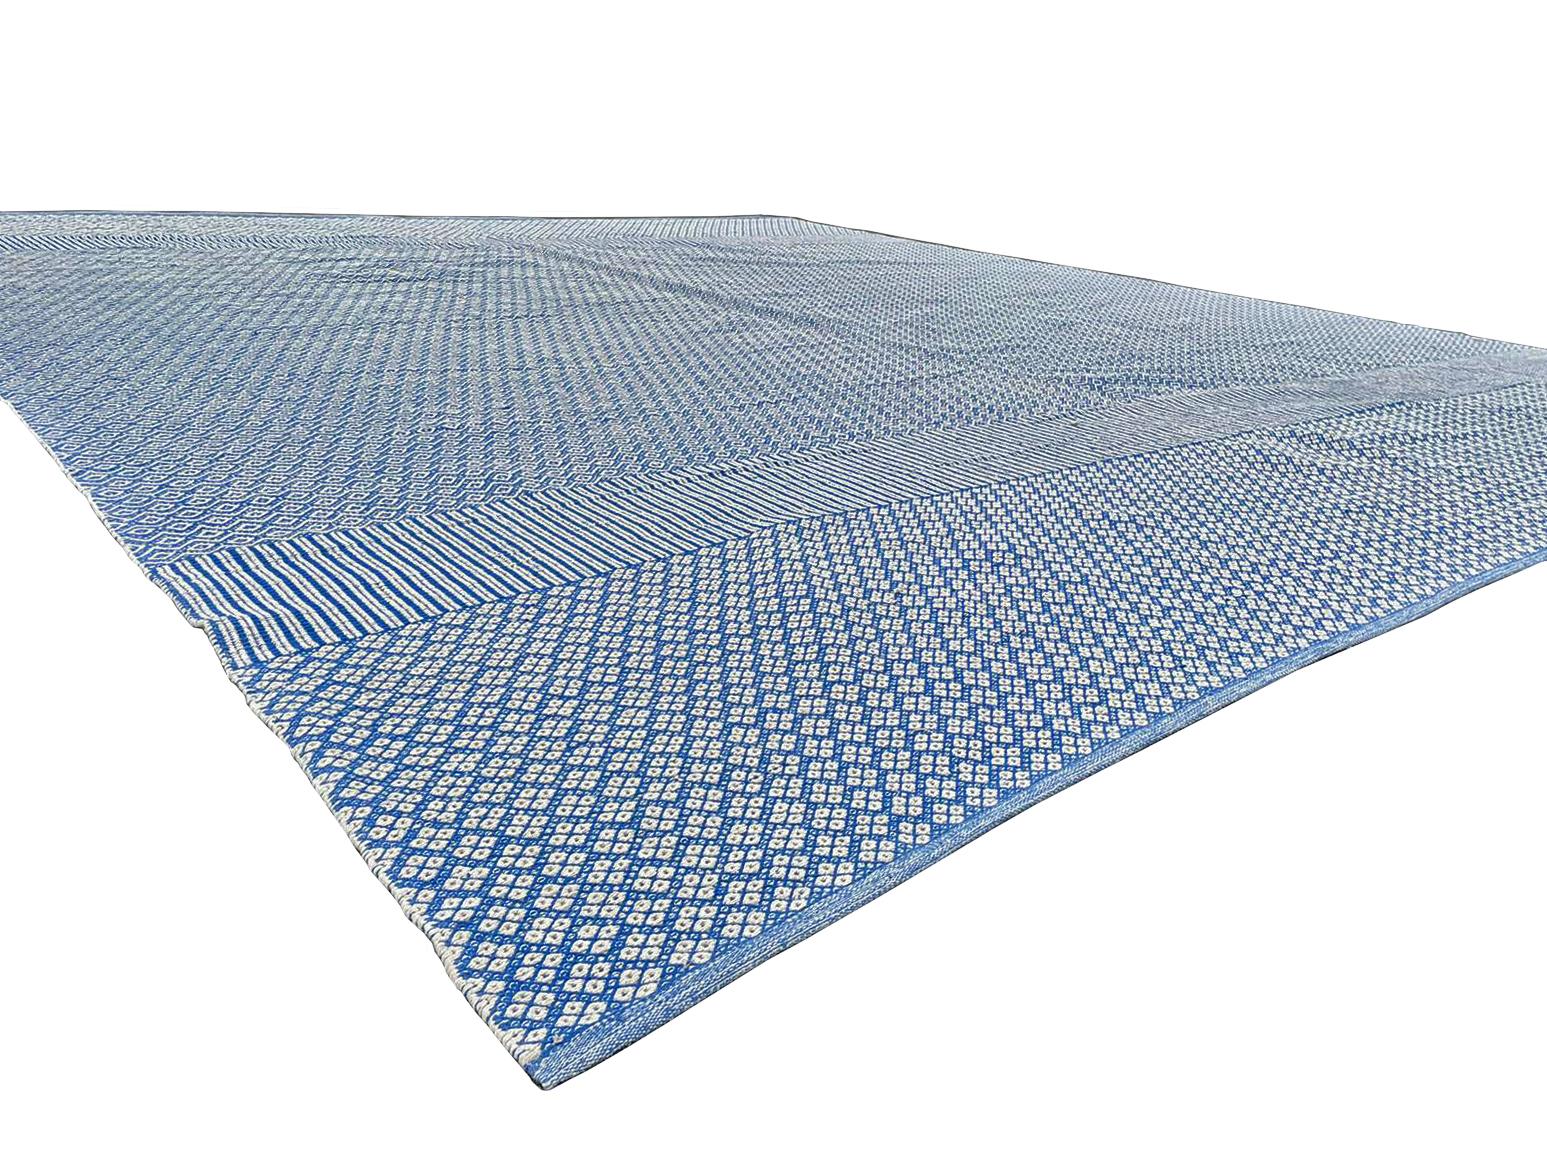 Wool Oversized Blue and White Flat-Weave Indian Kilim by Gordian Rugs